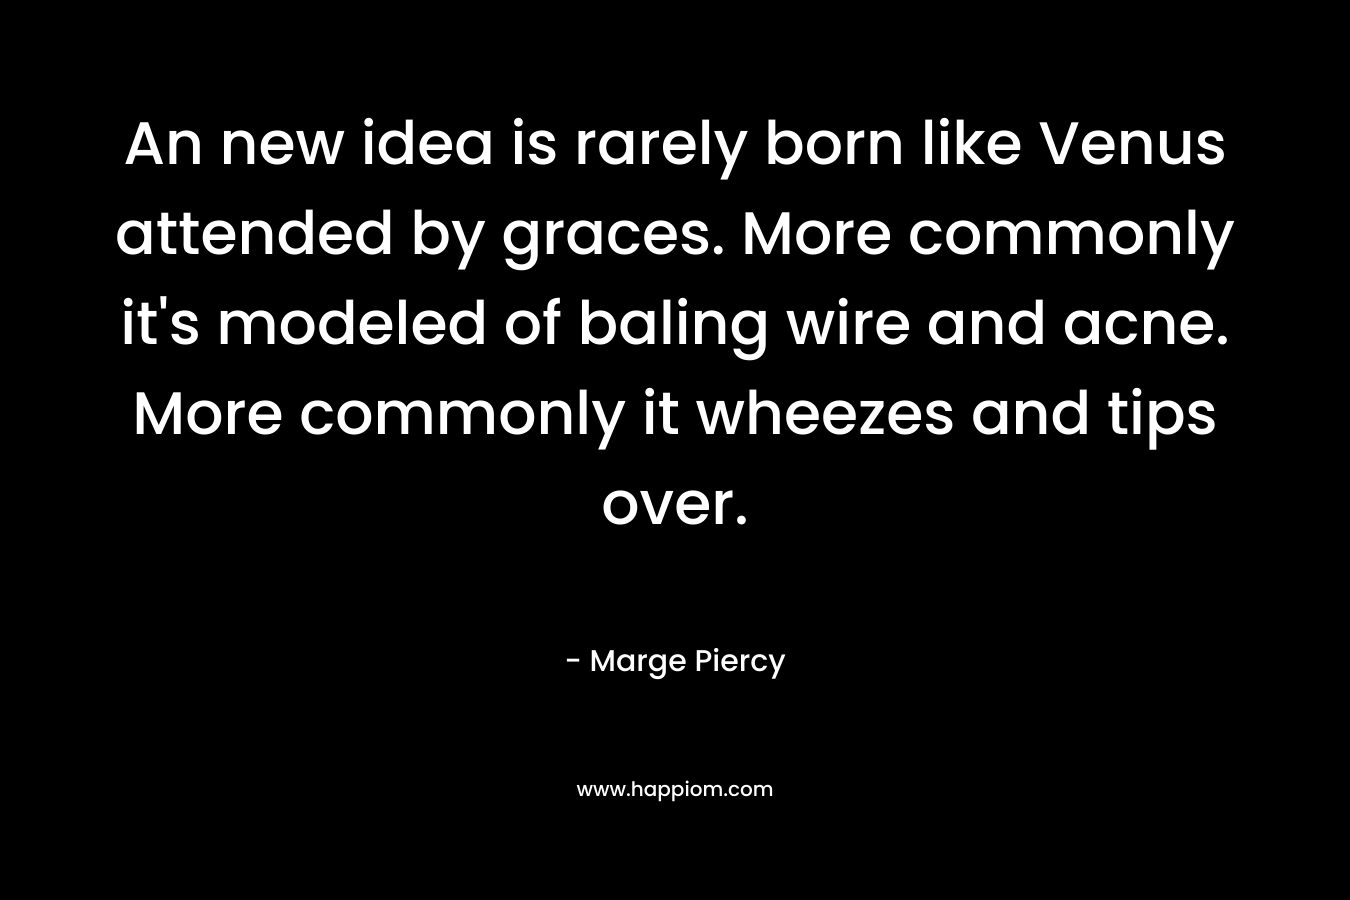 An new idea is rarely born like Venus attended by graces. More commonly it’s modeled of baling wire and acne. More commonly it wheezes and tips over. – Marge Piercy